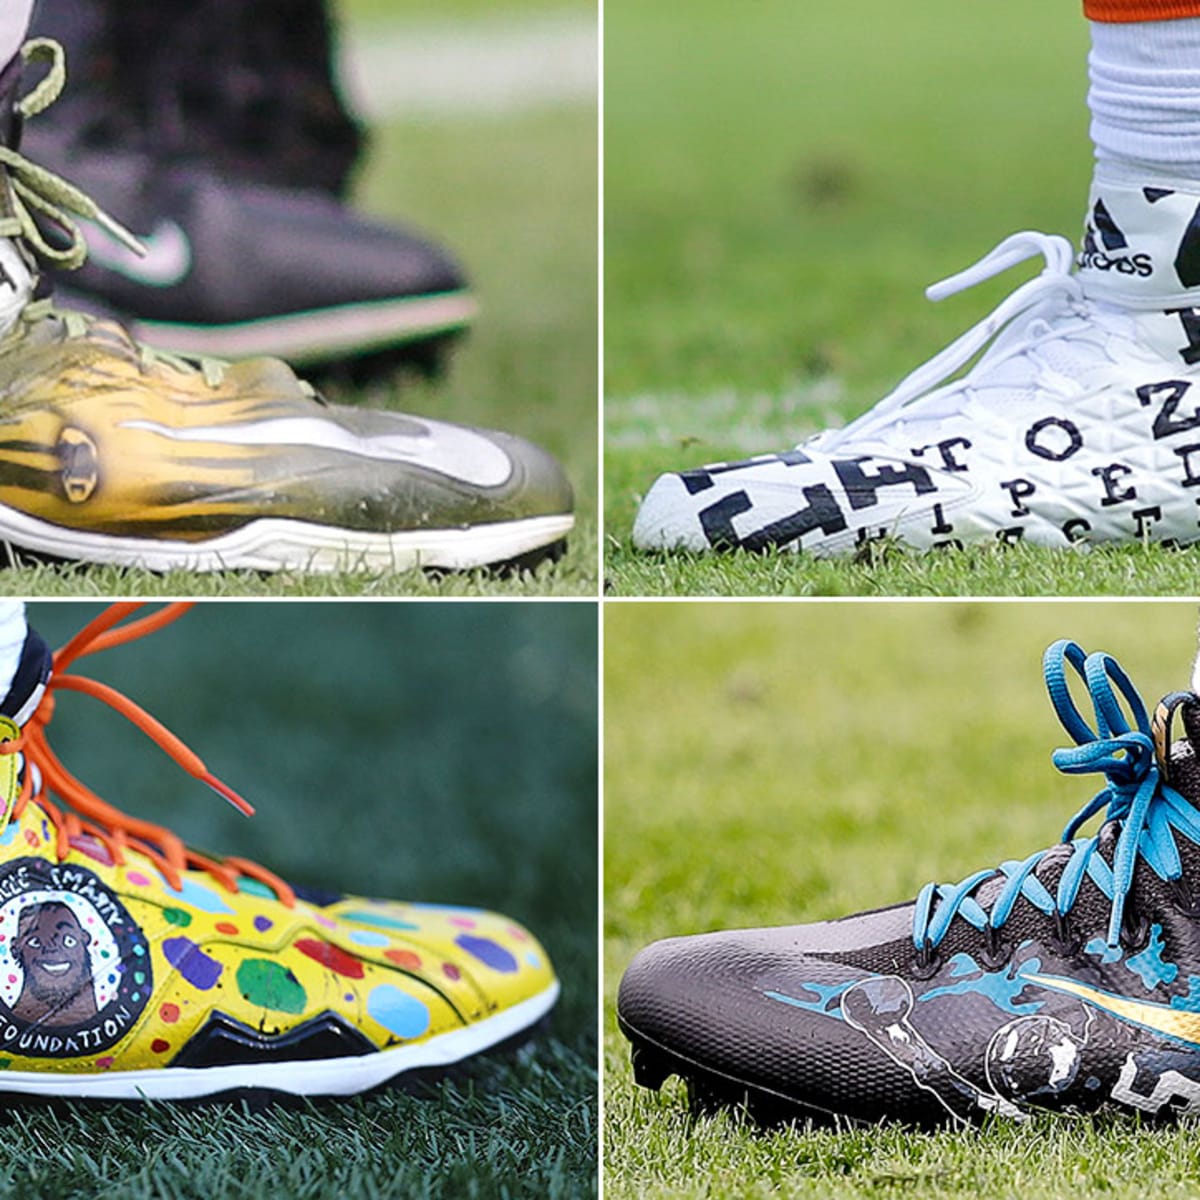 On Sunday, nearly 40 Houston Texans players will bring awareness to causes  that are important to them in this year's NFL My Cause My Cleats campaign.